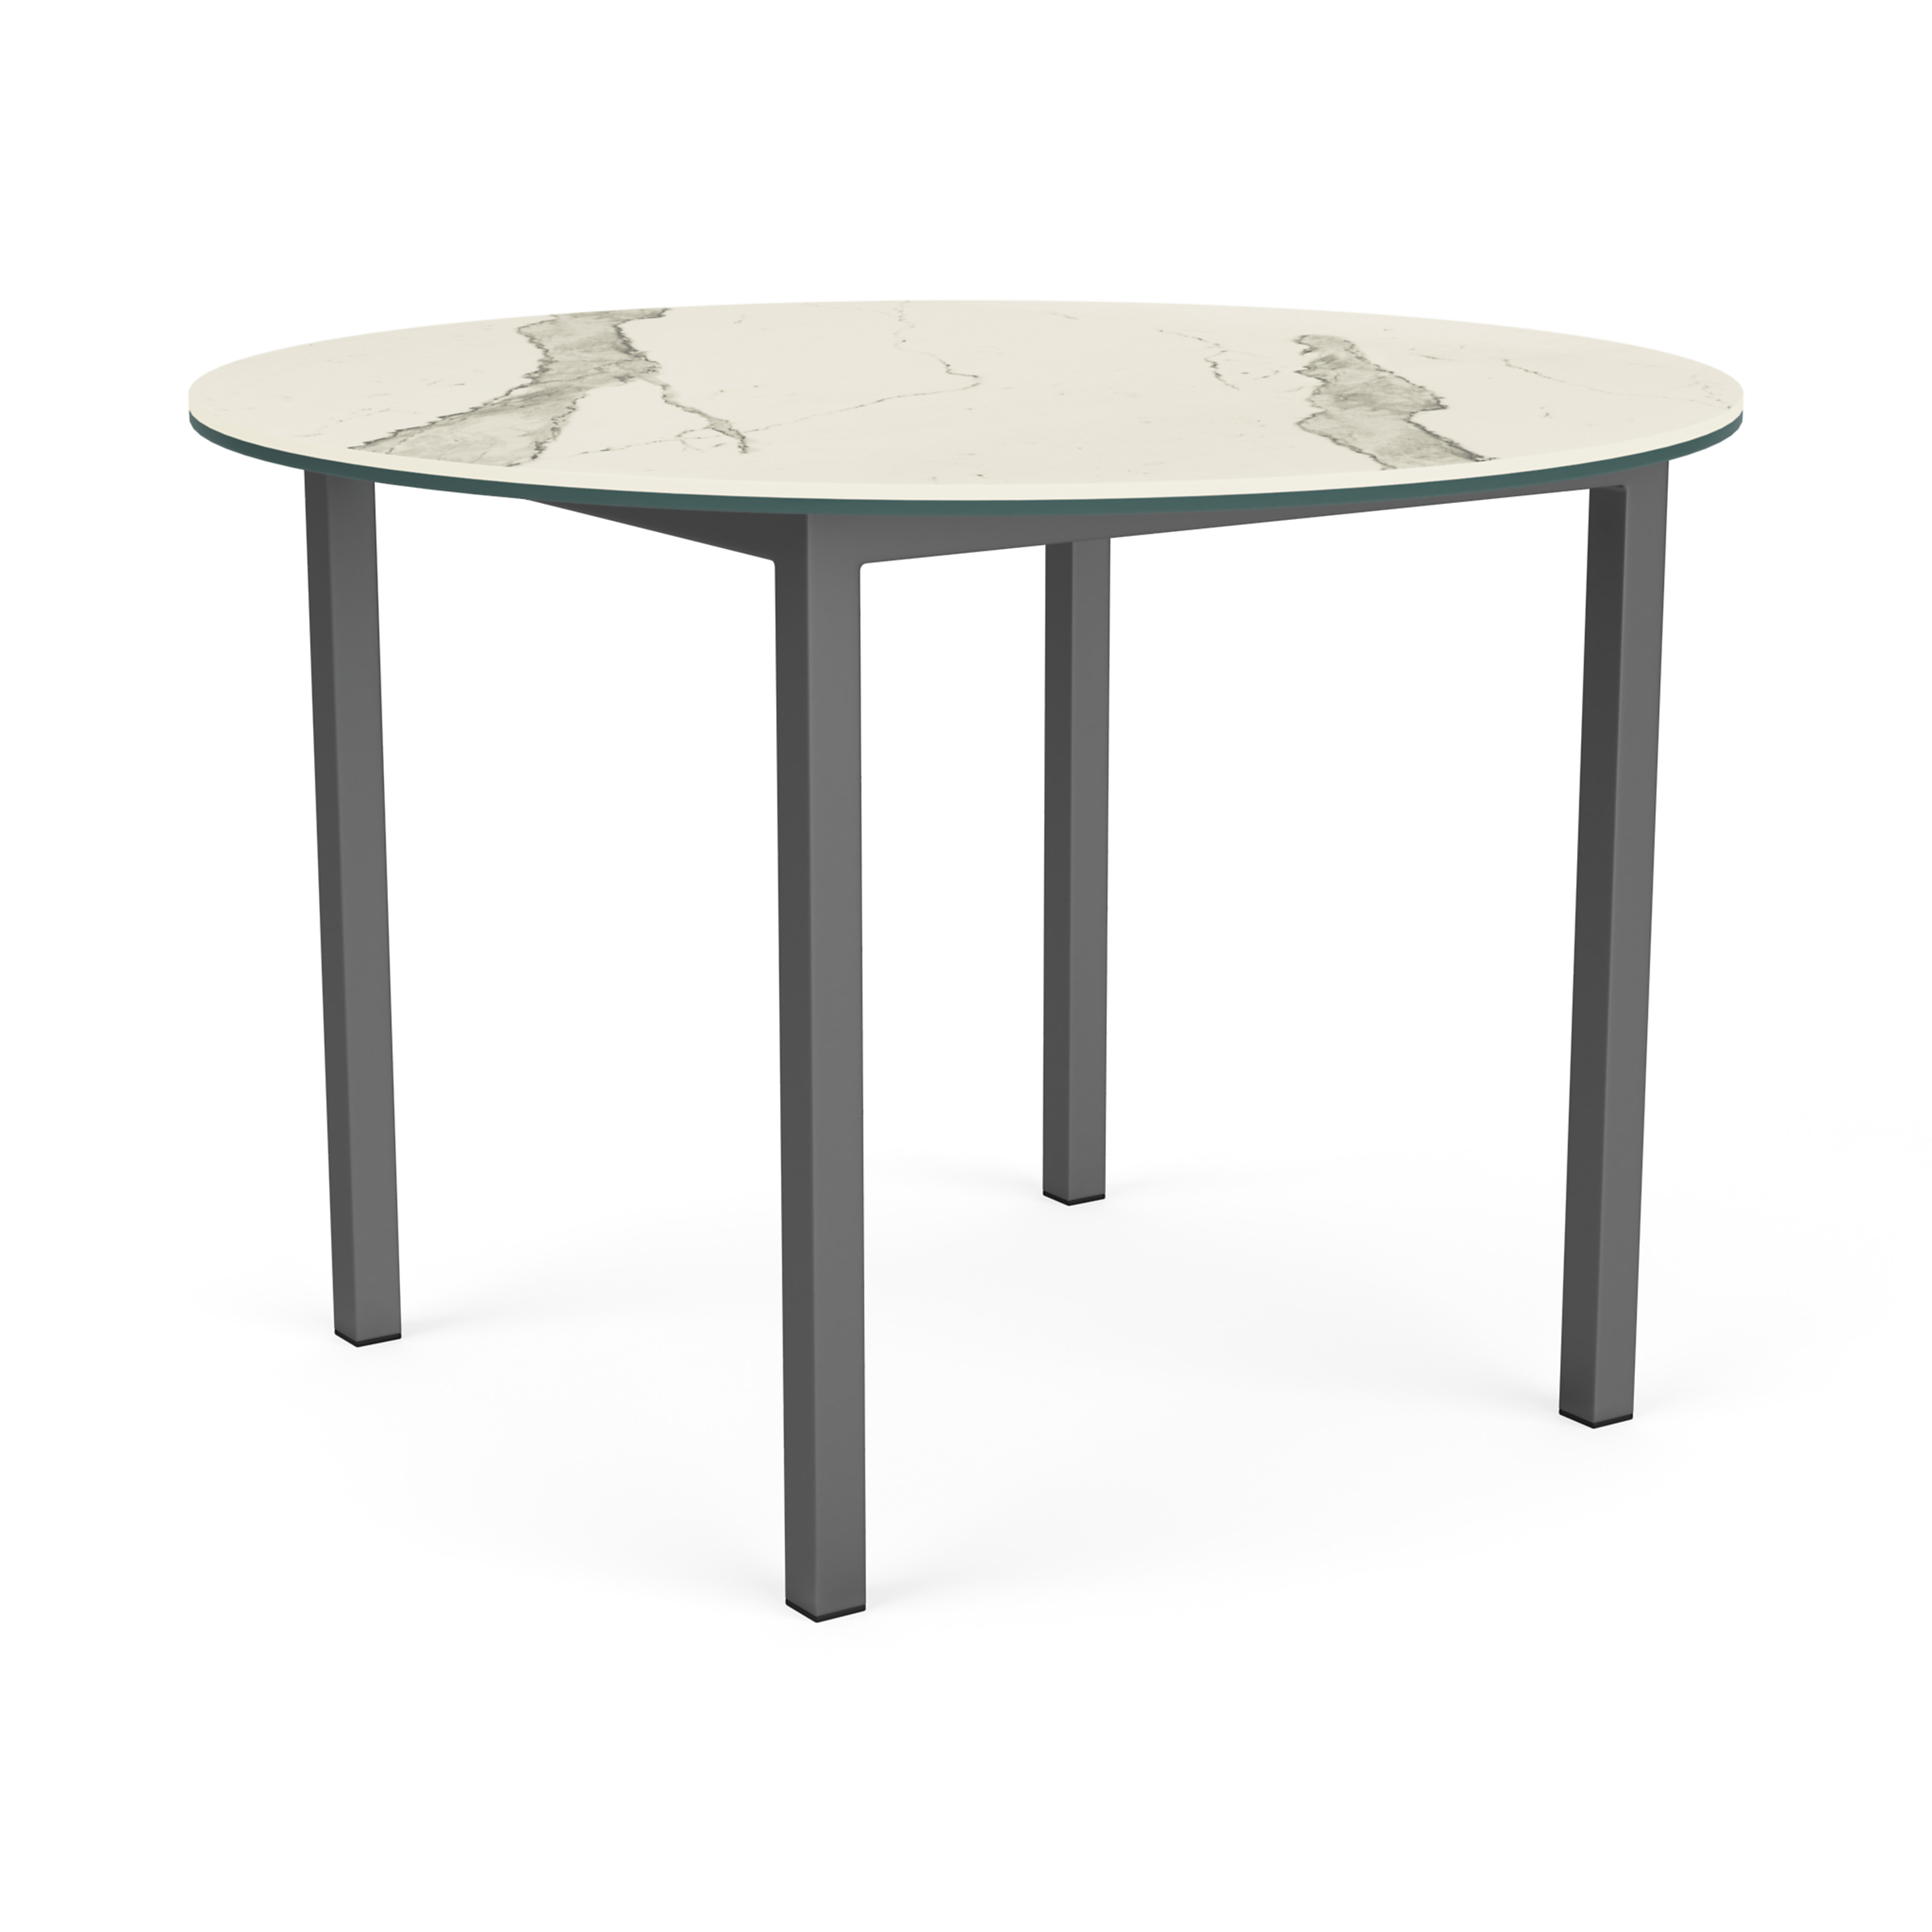 Parsons 42 diam 1.5" Outdoor Table in Graphite with Ceramic Top